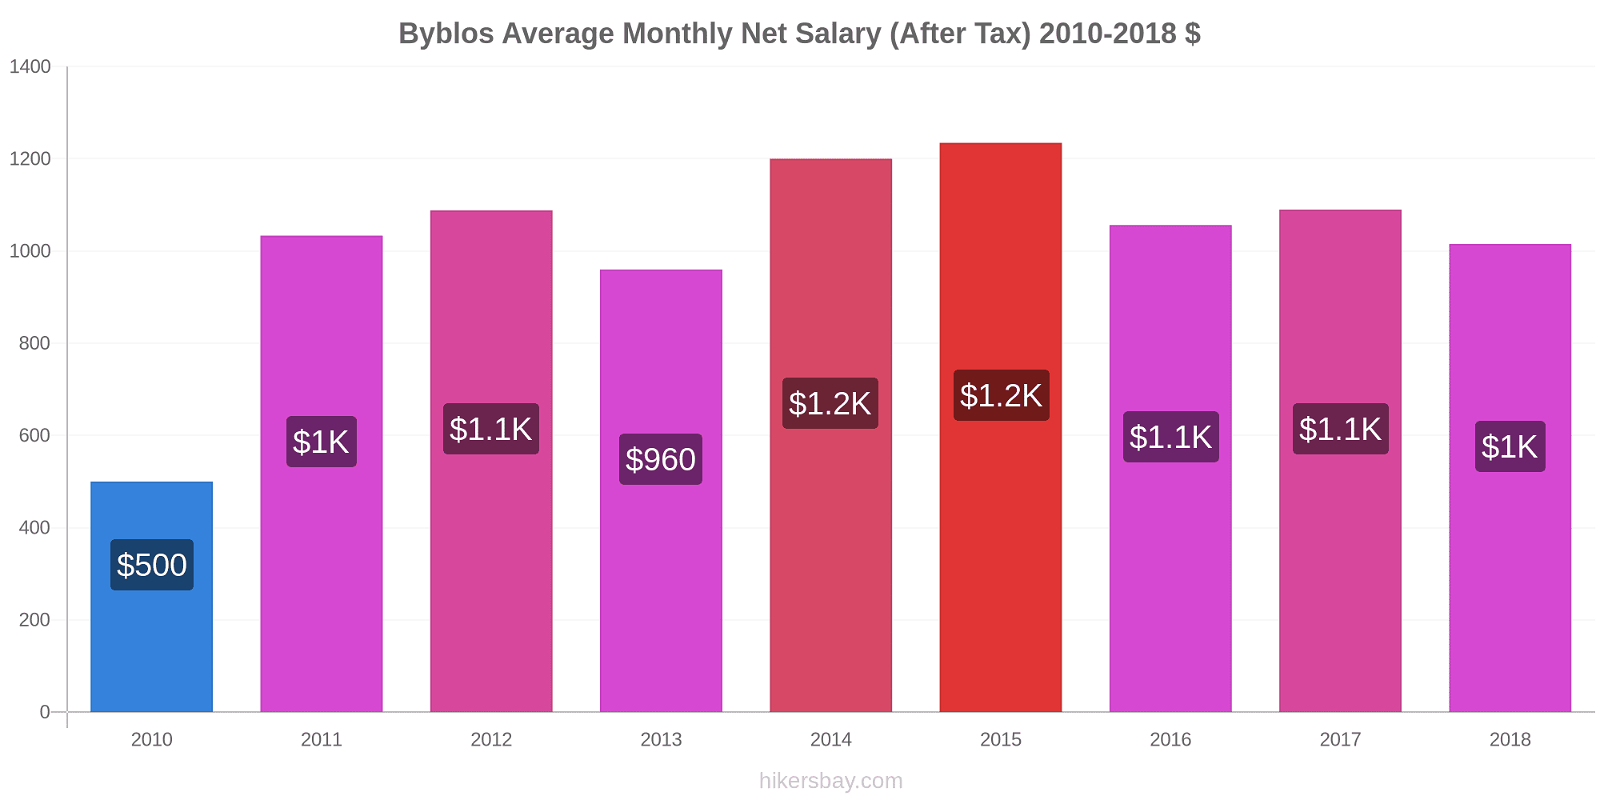 Byblos price changes Average Monthly Net Salary (After Tax) hikersbay.com